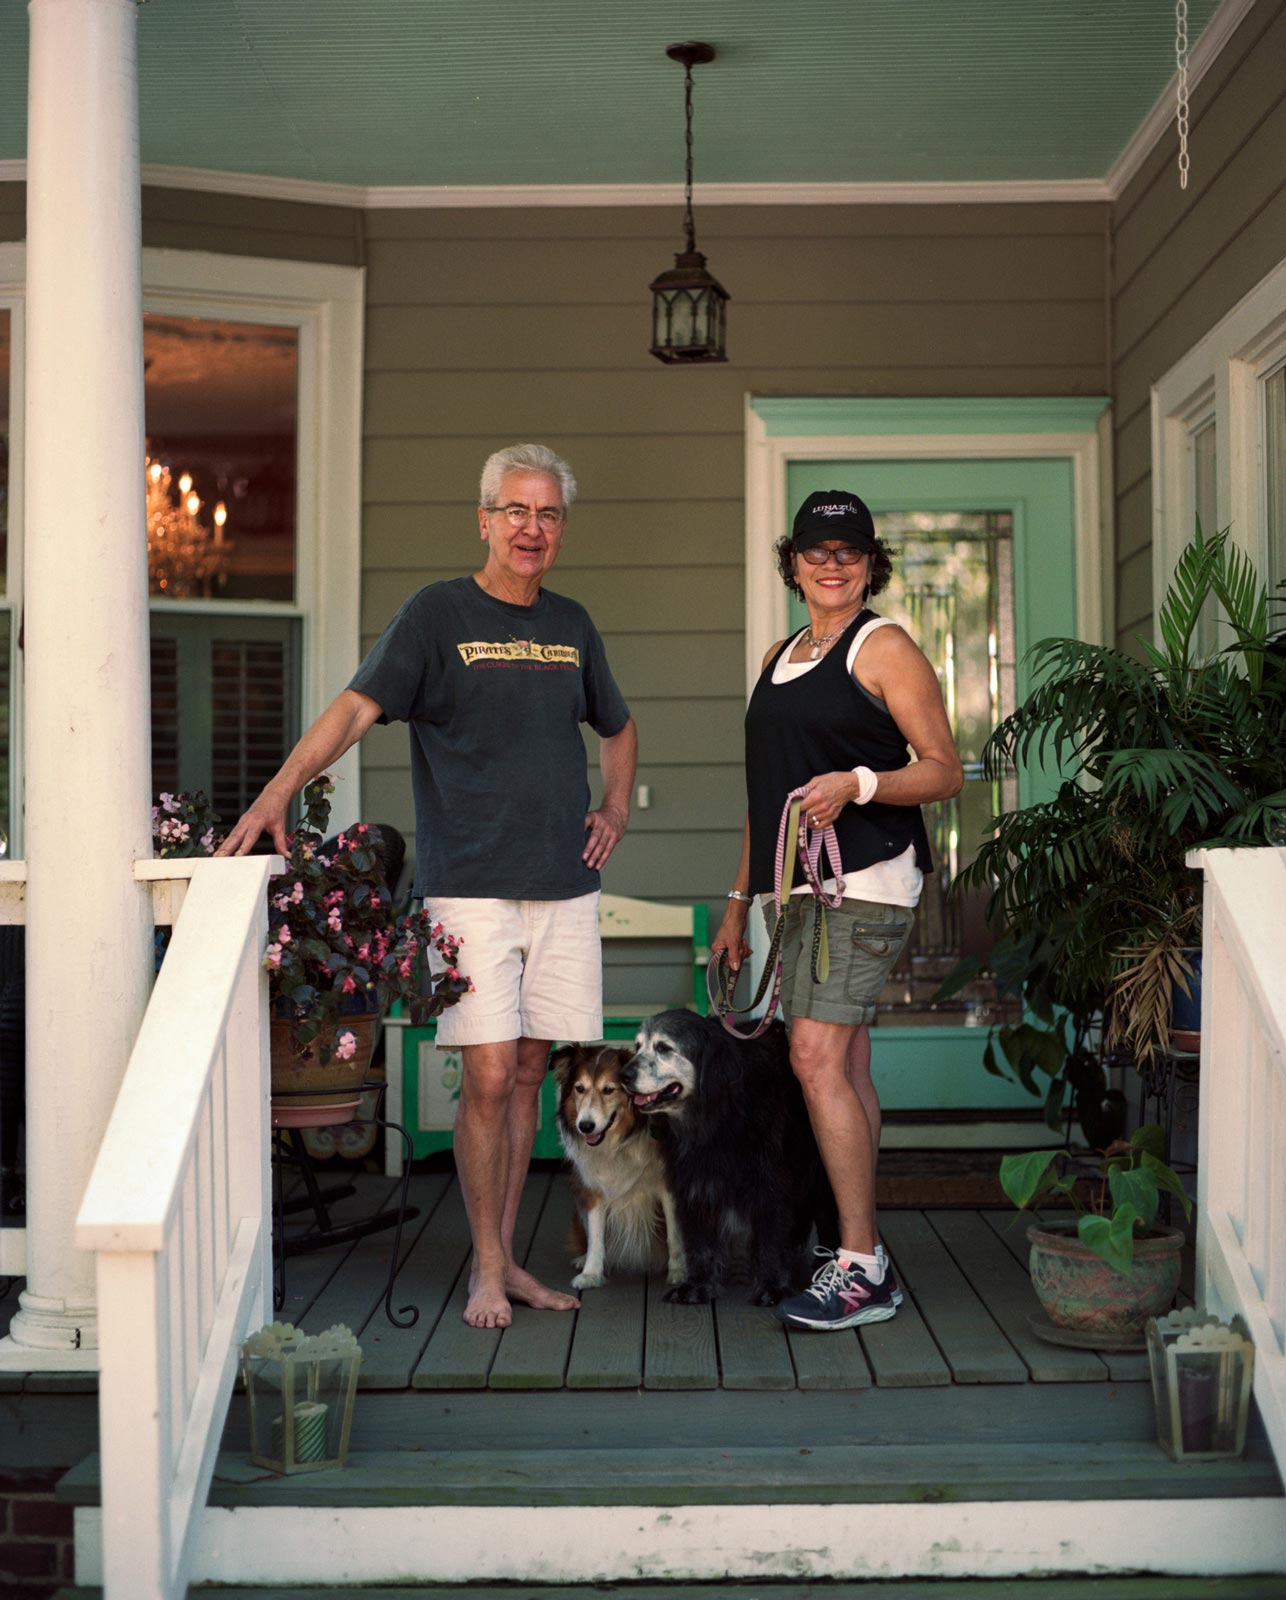 Diana and Sven on their front porch in Richmond Virginia.